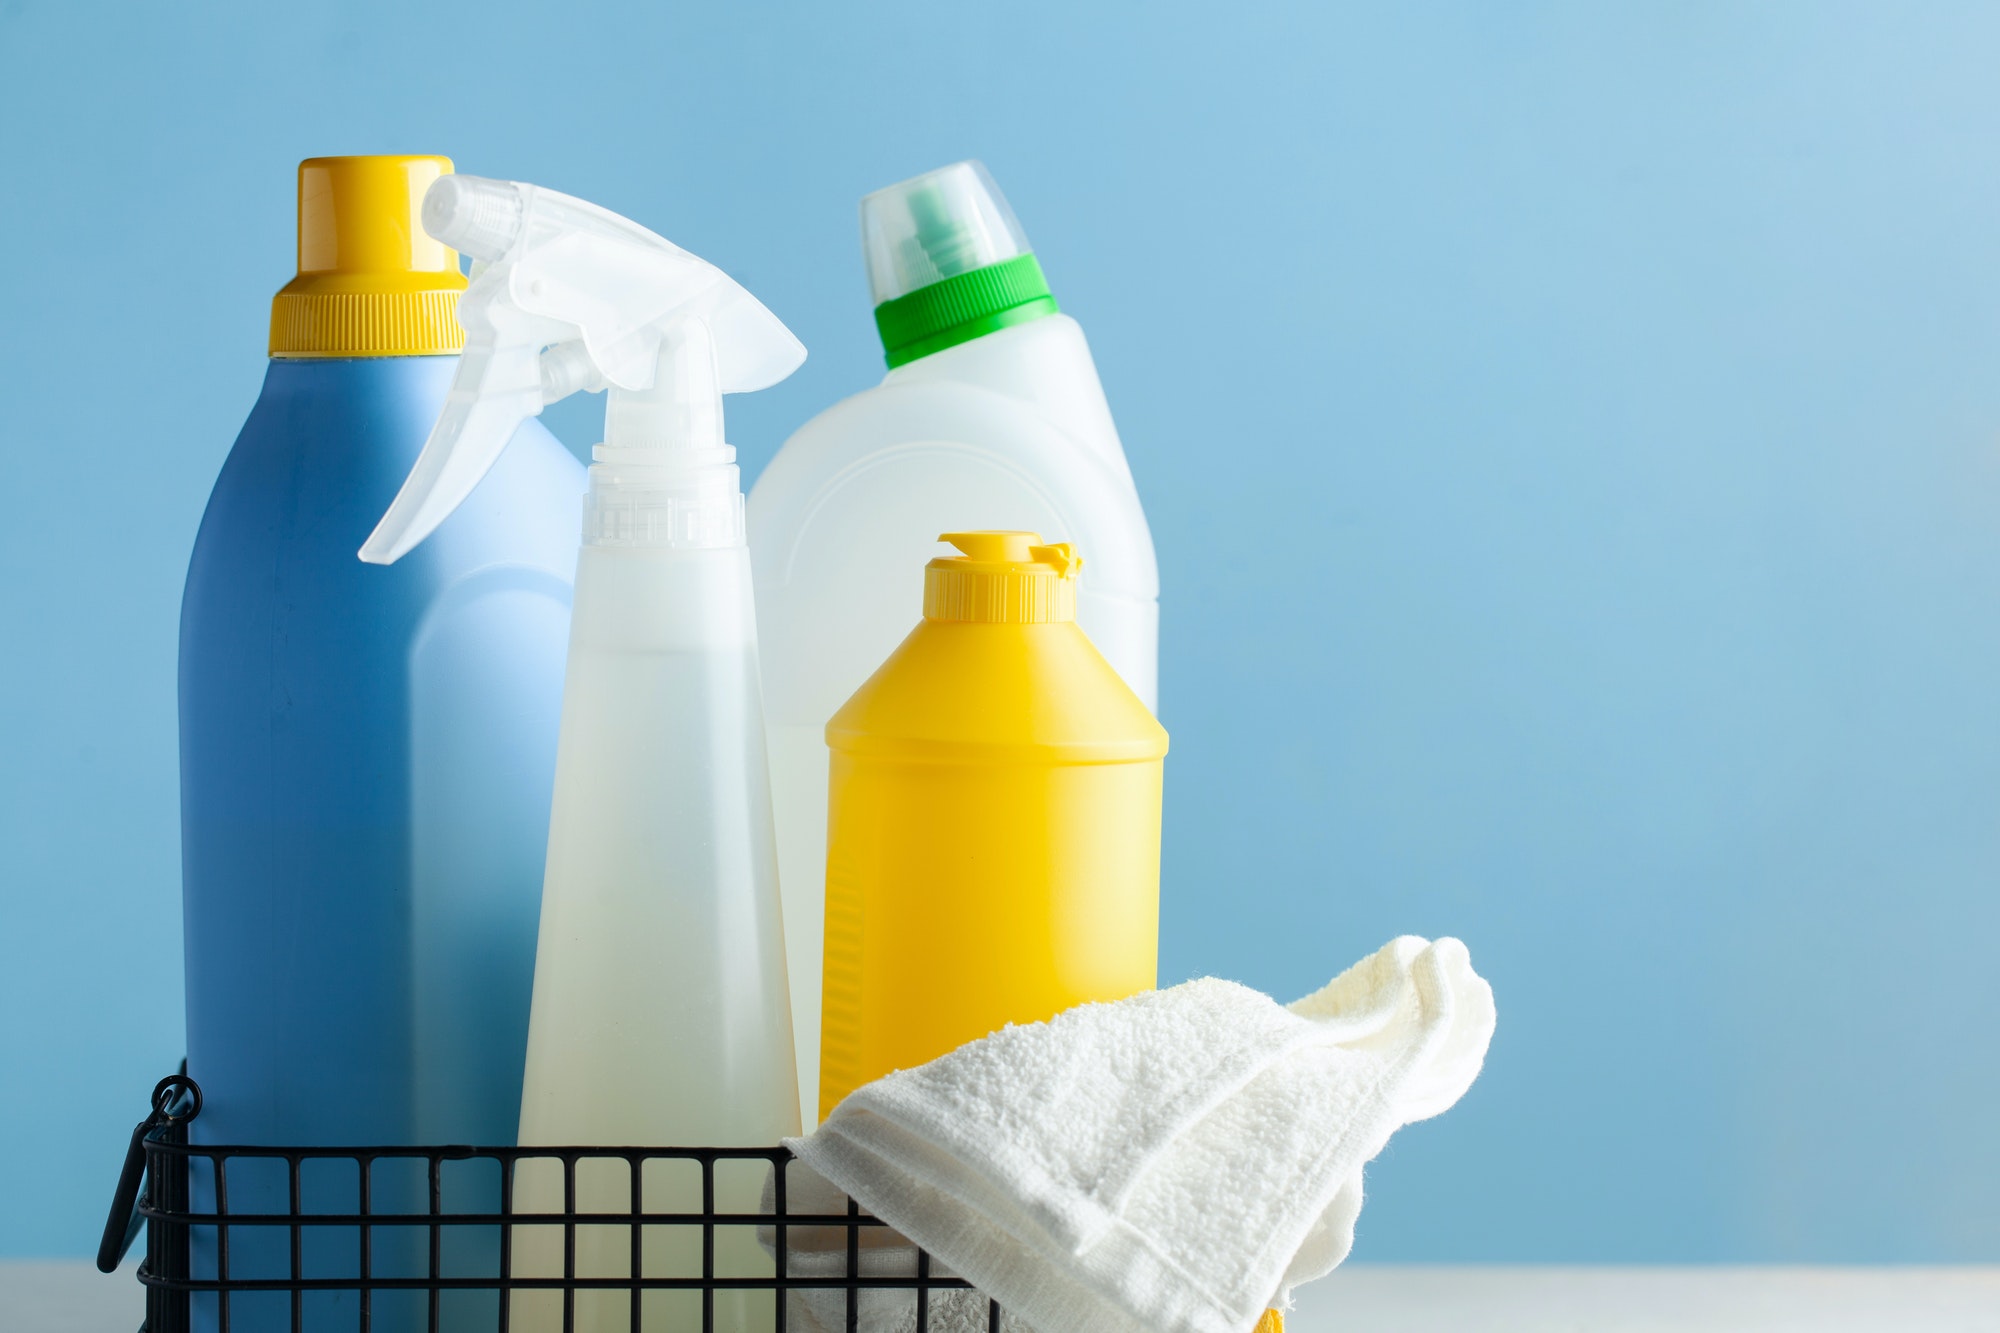 Cleaning products for cleaning, disinfection of the house, premises on a blue background.